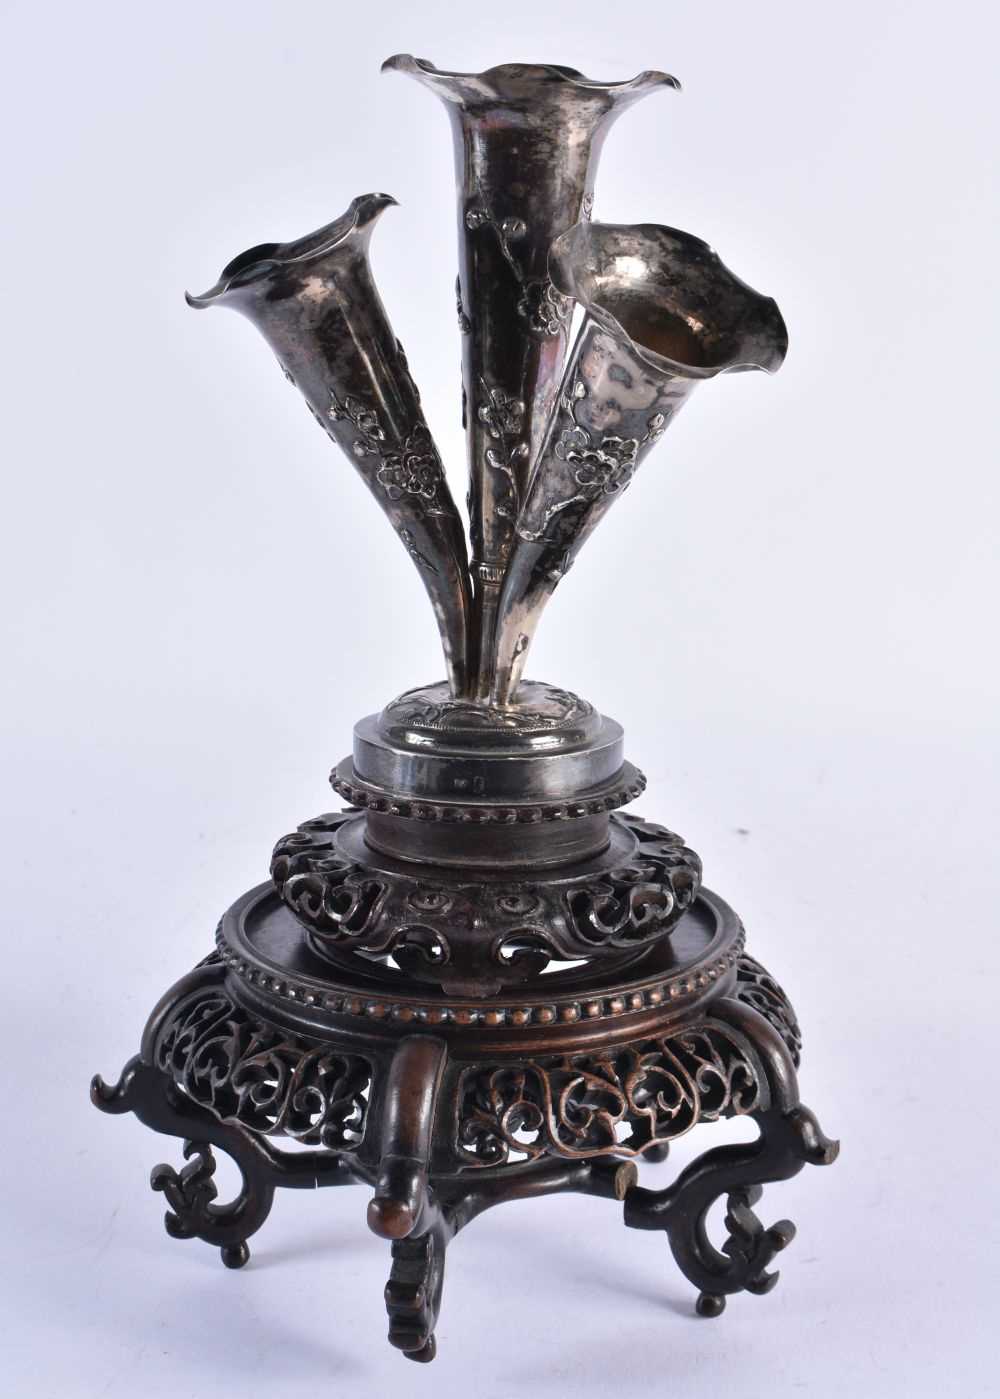 AN UNUSUAL 19TH CENTURY CHINESE SILVER FOUR VASE EPERGNE by Wang Hing, upon a fine quality